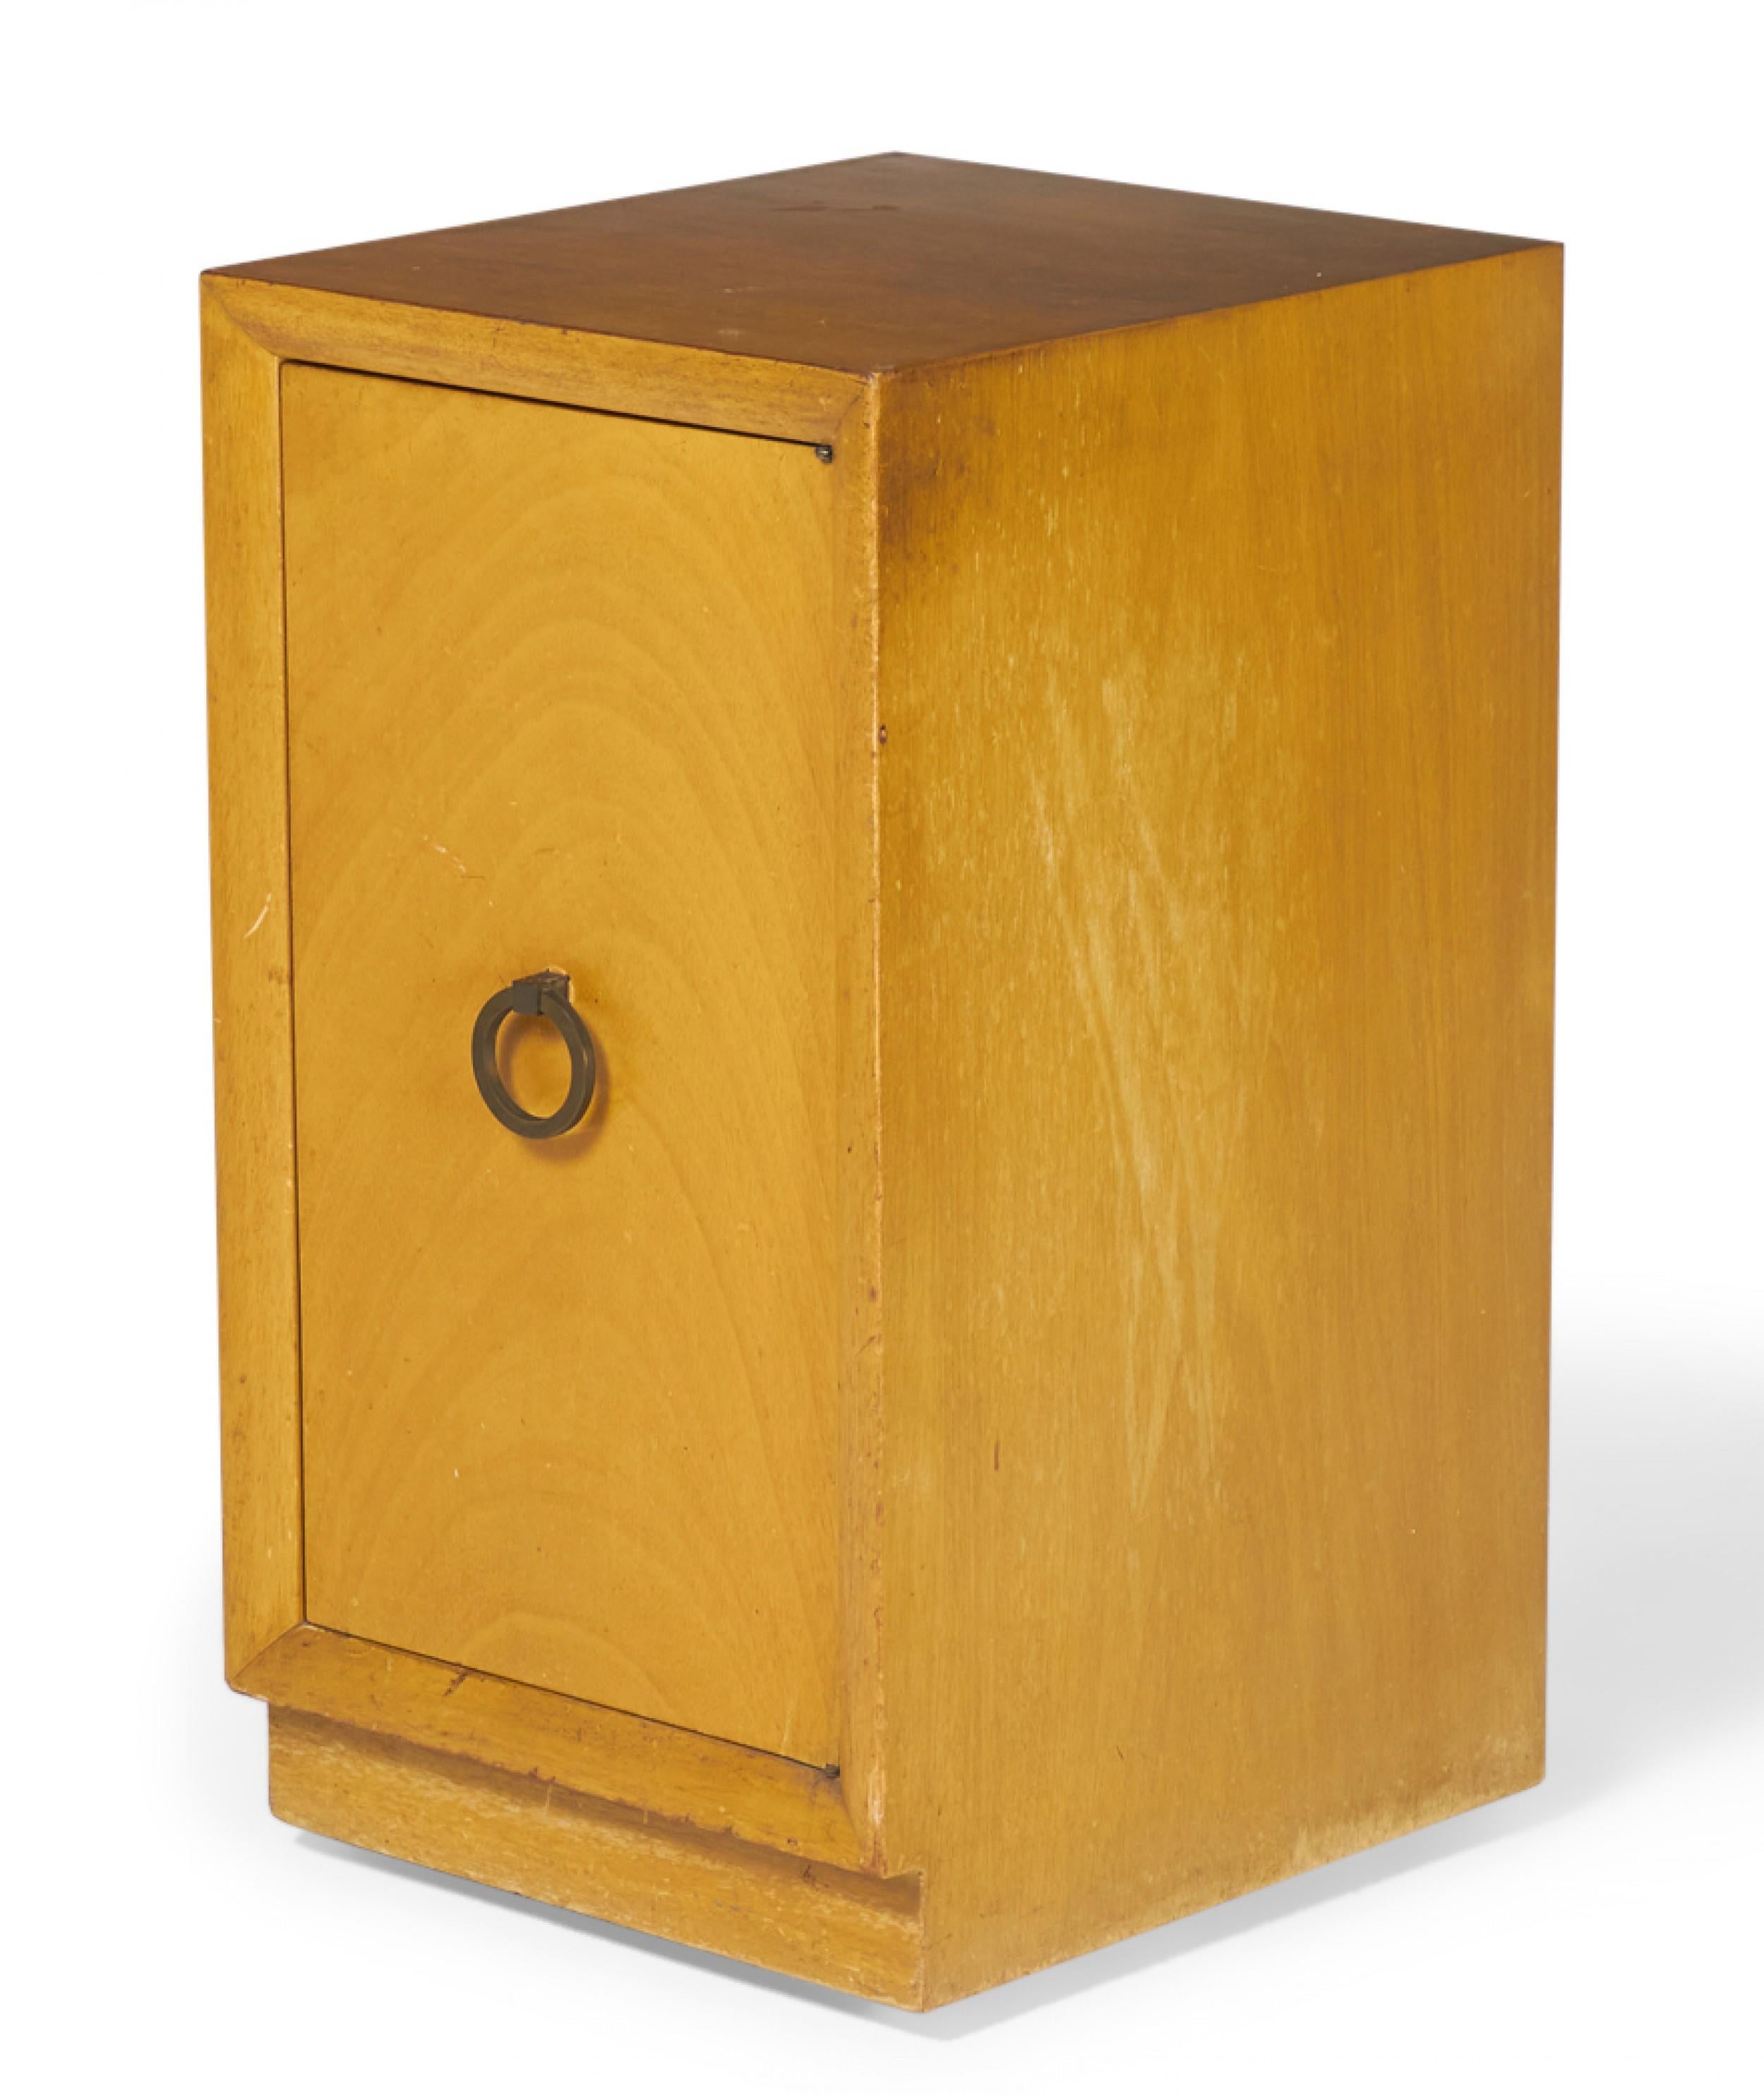 Pair of American mid-century blond maple nightstands / tall cabinets with a single compartment concealed by a hinged door with a brass ring door pull. (WIDDICOMB MODERN)(PRICED AS PAIR)(Similar cabinet: DUF0149A)
 